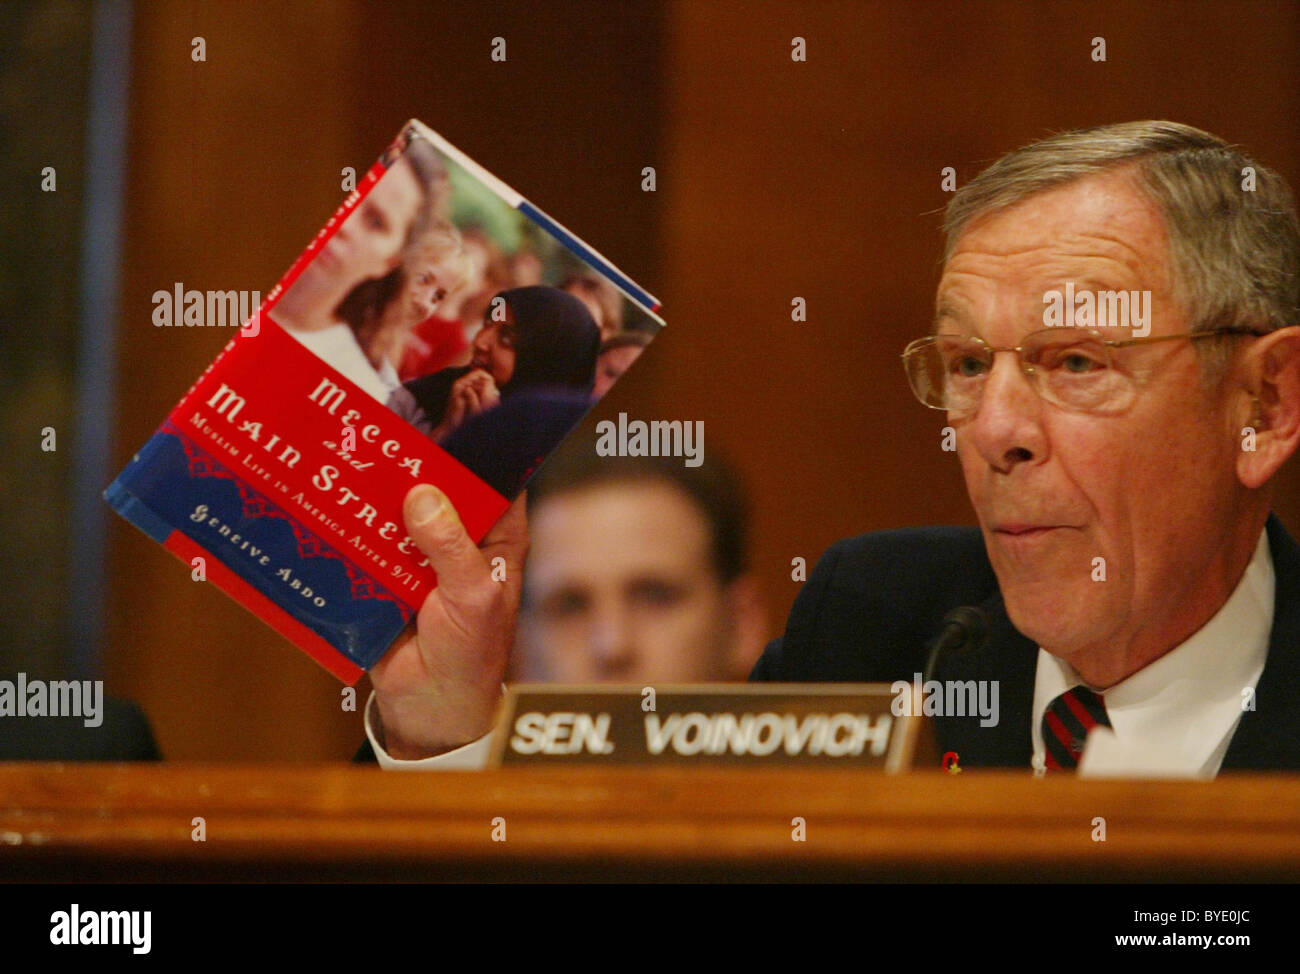 Senator George V. Voinovich (R-OH) displays a book he says touches on the concerns about the radicalization of Islam in America Stock Photo